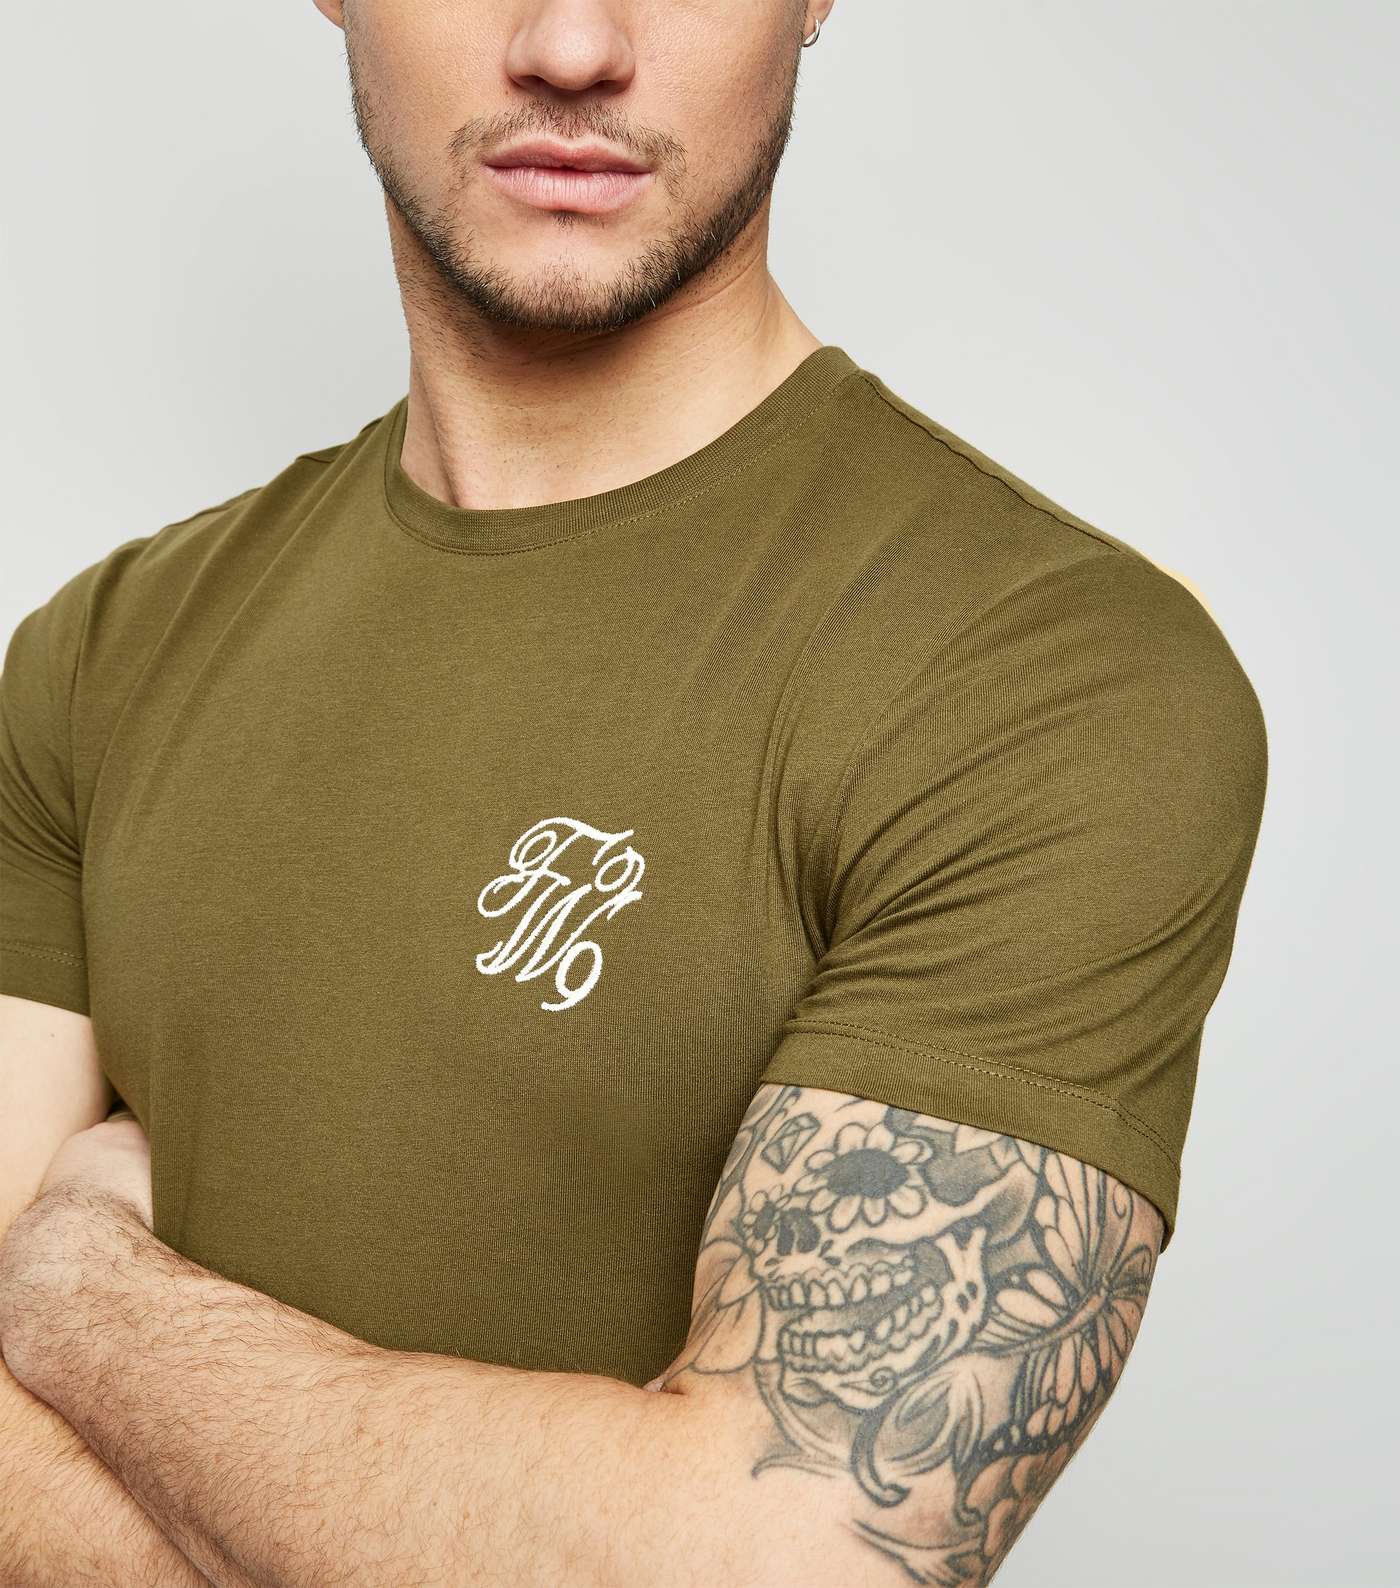 Green TW9 Embroidered Muscle Fit T-Shirt Image 5